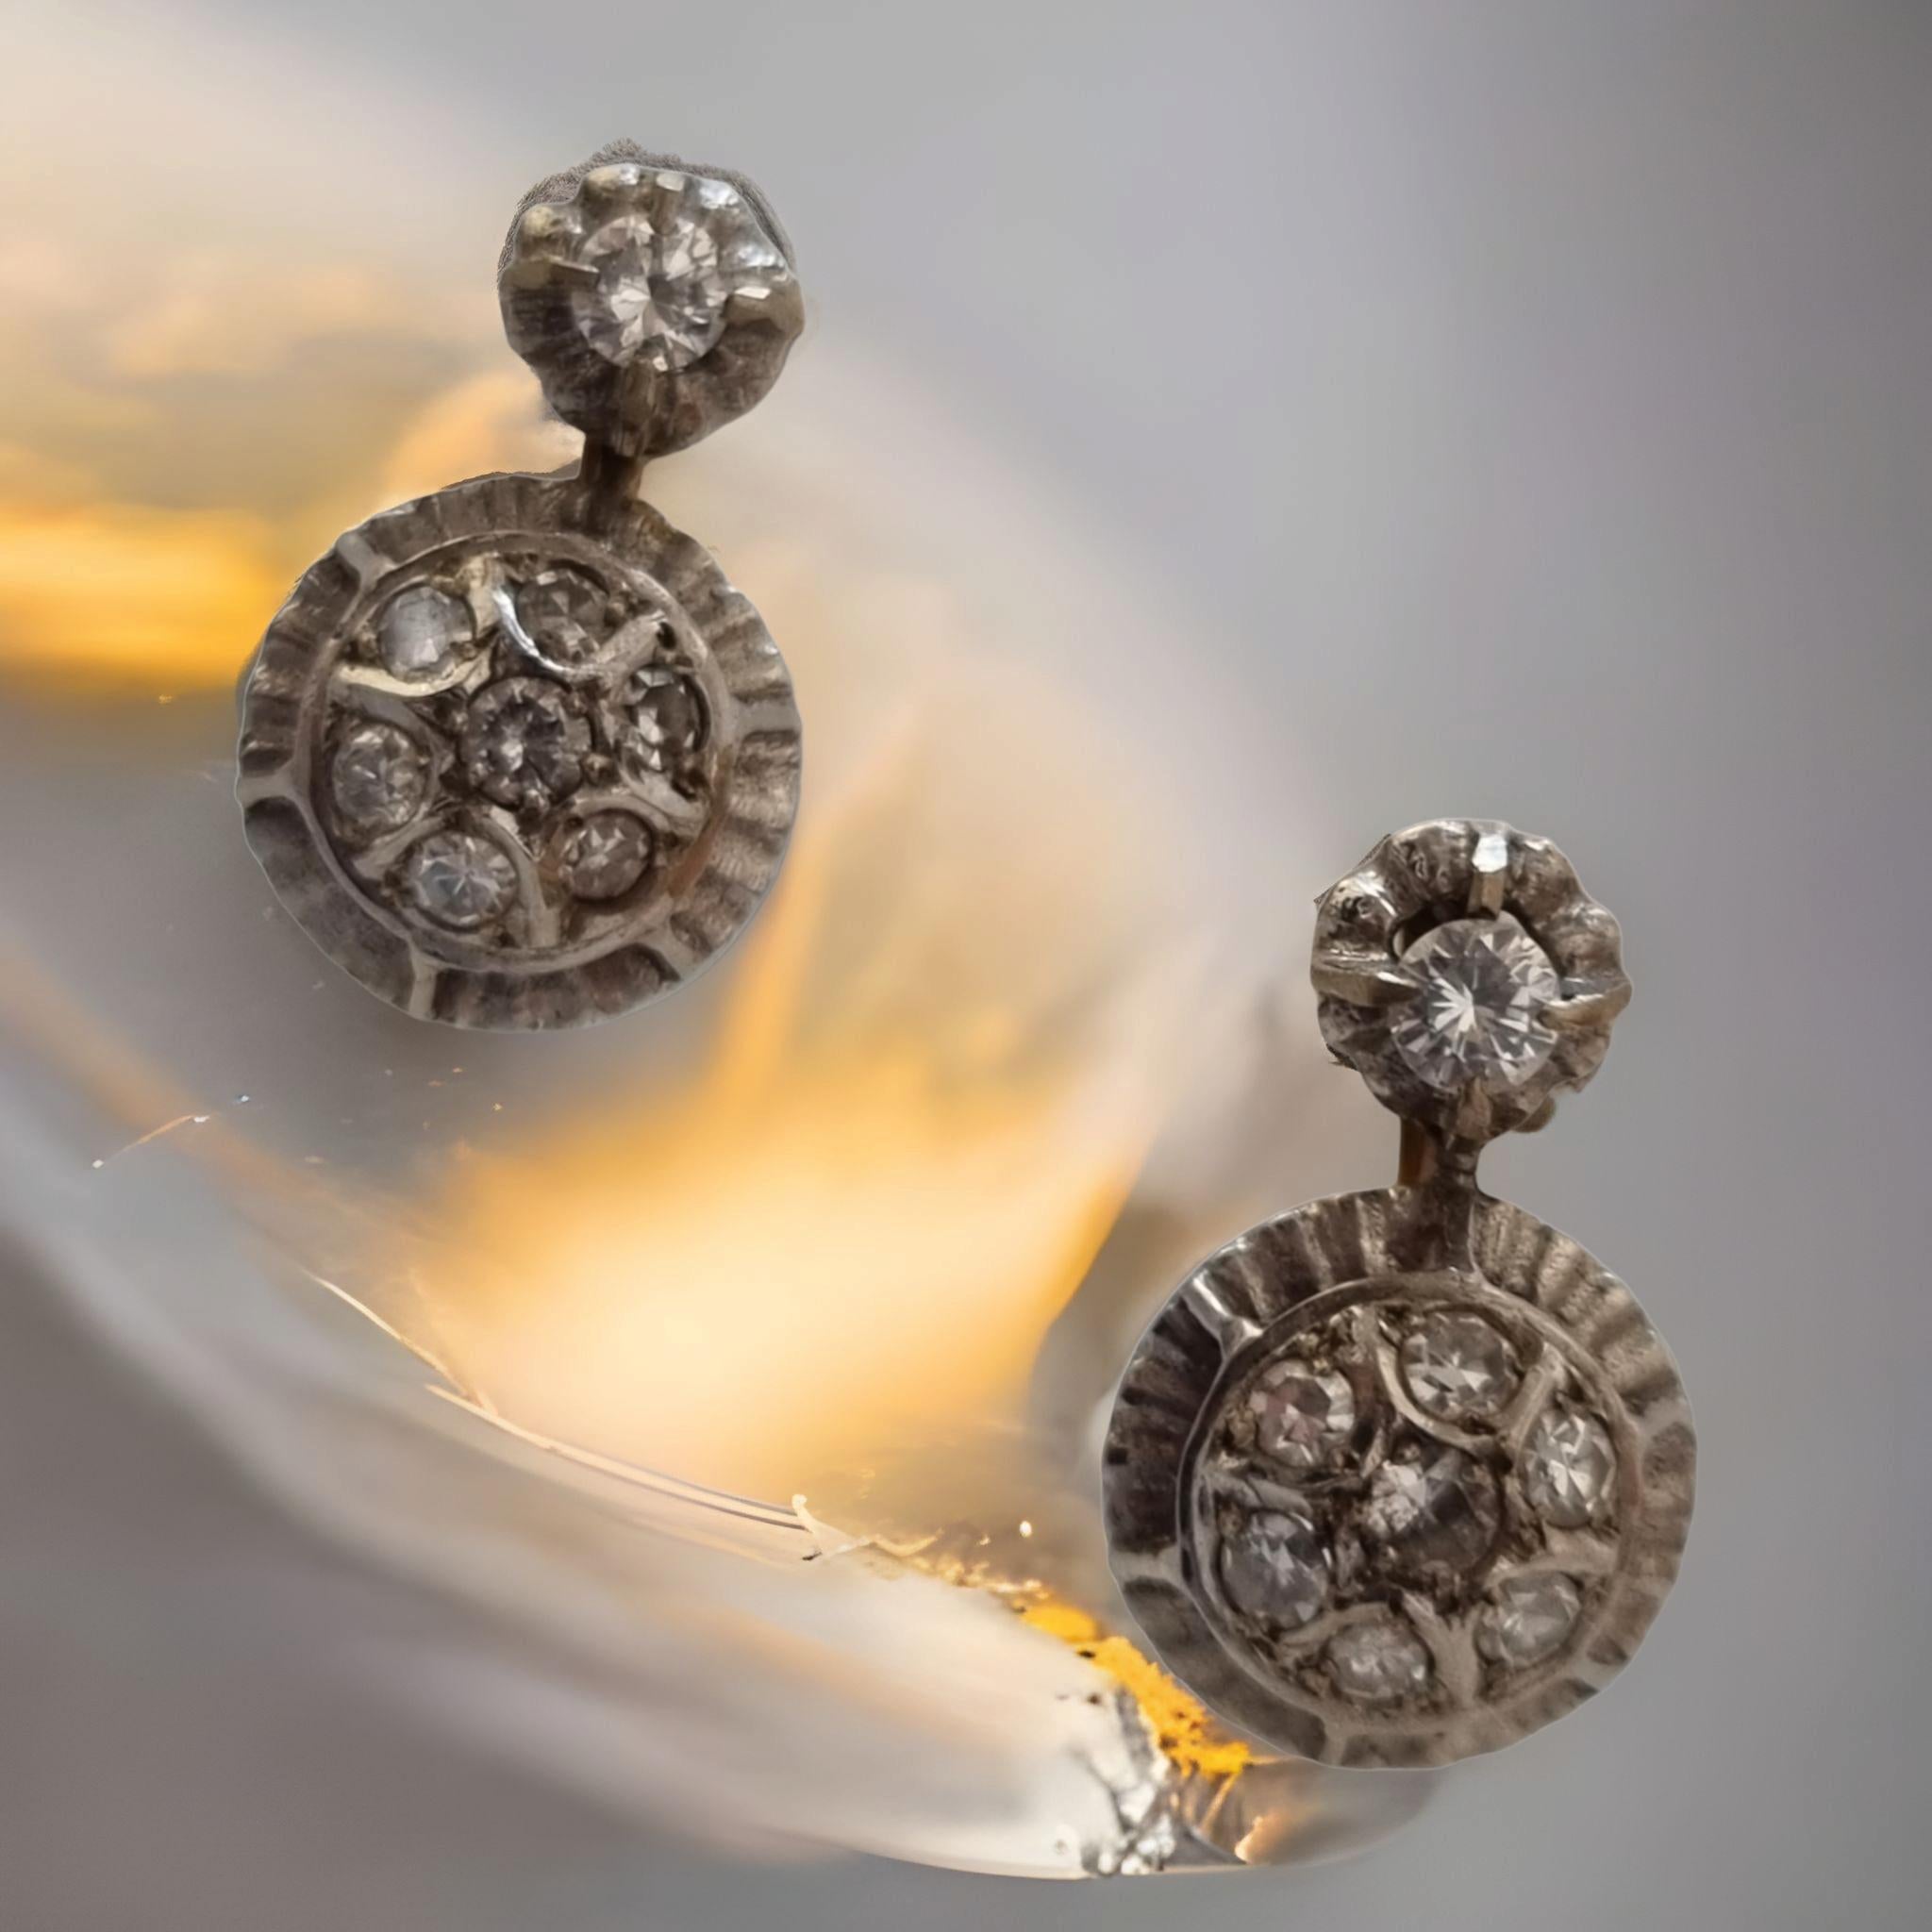 ANTIQUE SPANISH DANGLE CLUSTER DIAMOND EARRINGS (Circa 1901-1915)
Edwardian Jewelry: 1901-1915
A central disc cluster of bright-white old European-cut diamonds floats inside--and slightly above-- a ring of the same, all of which dazzle and dance